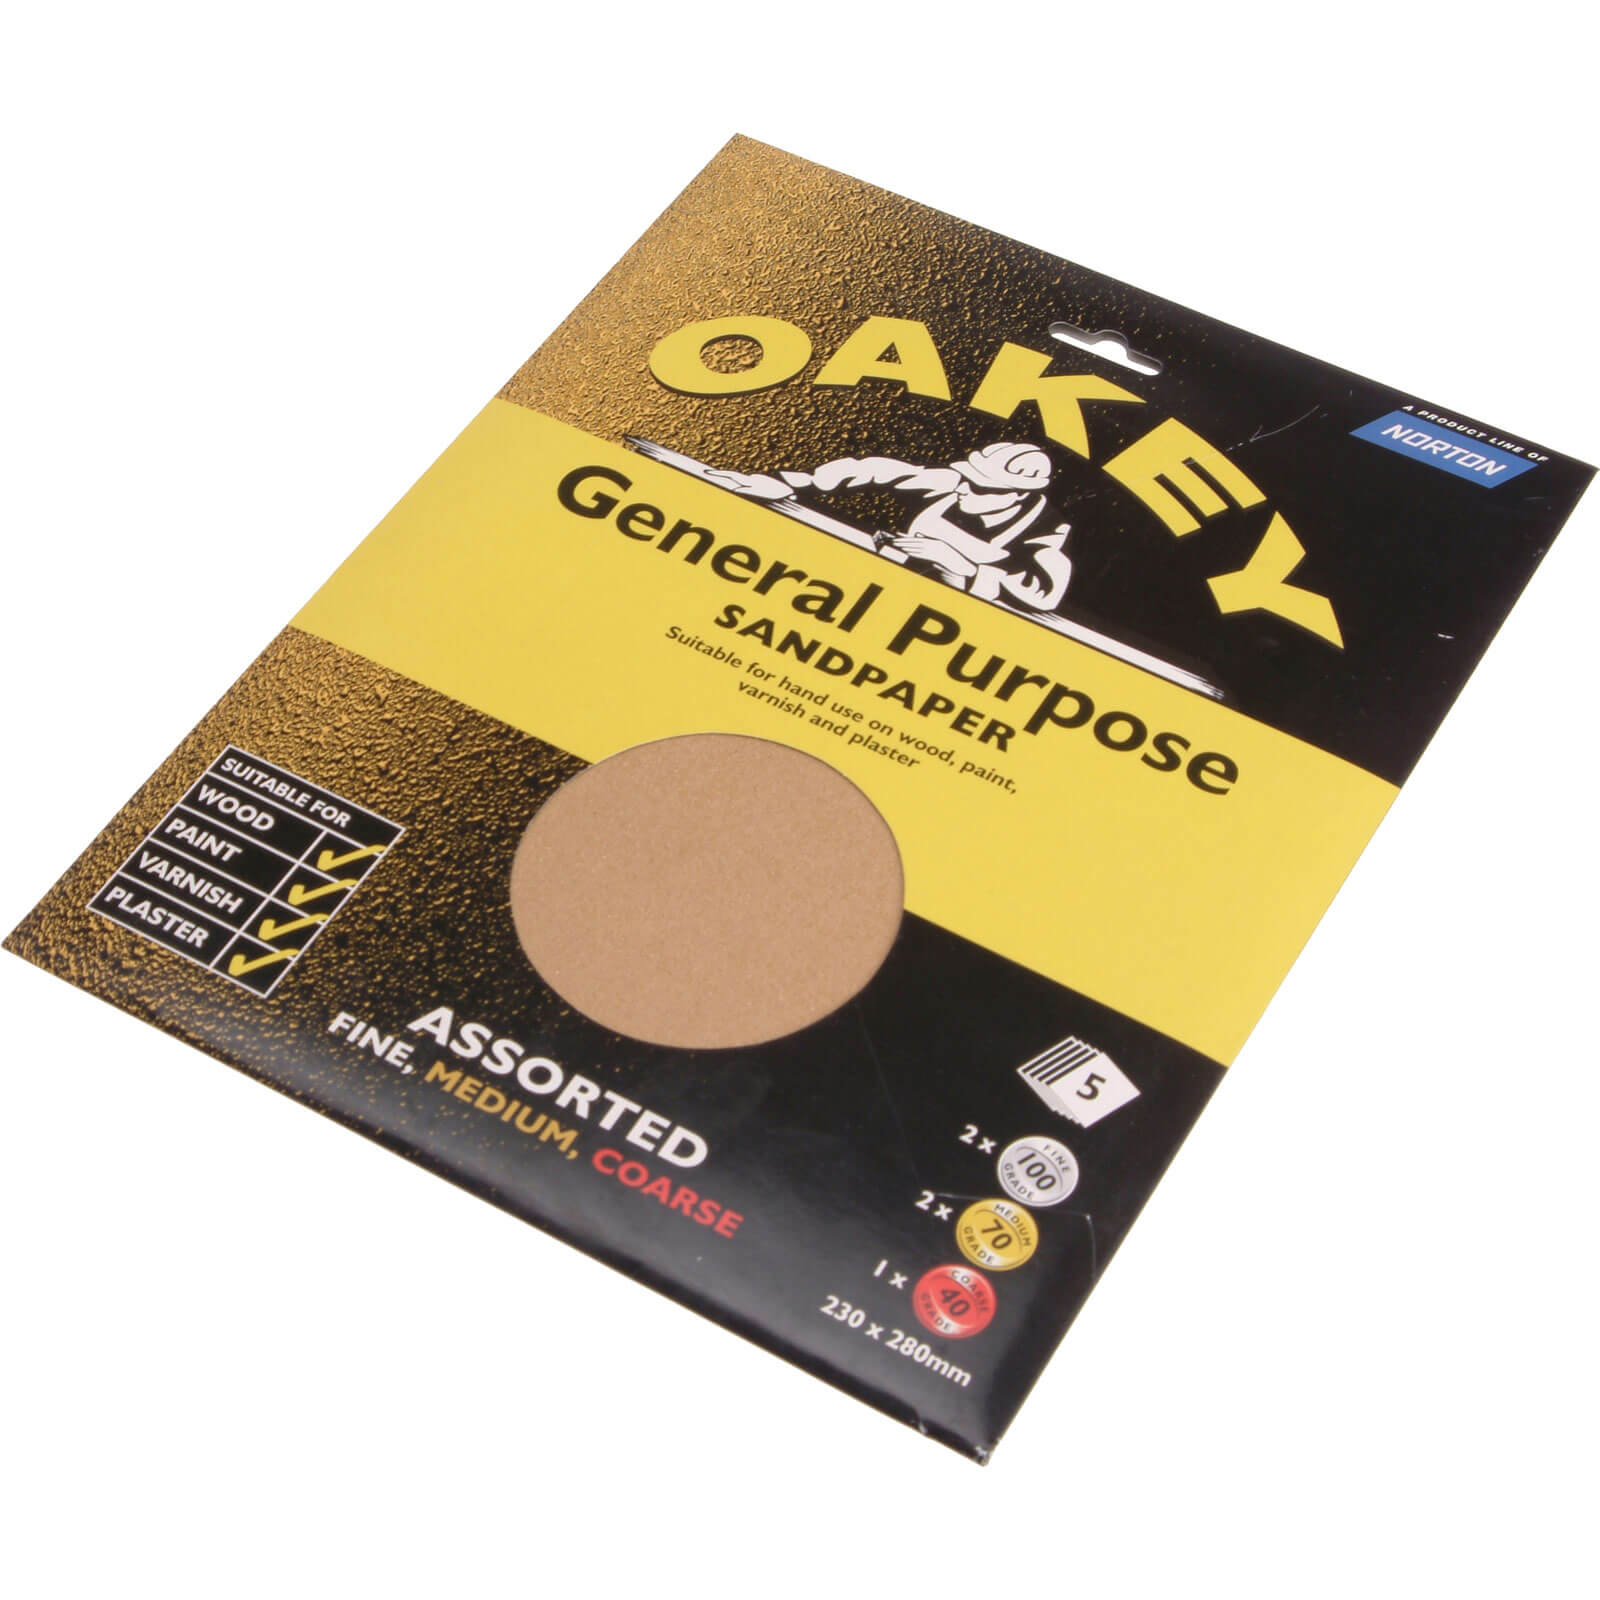 Oakey Glasspaper Sheets 2.5 63642558284 Pack of 25